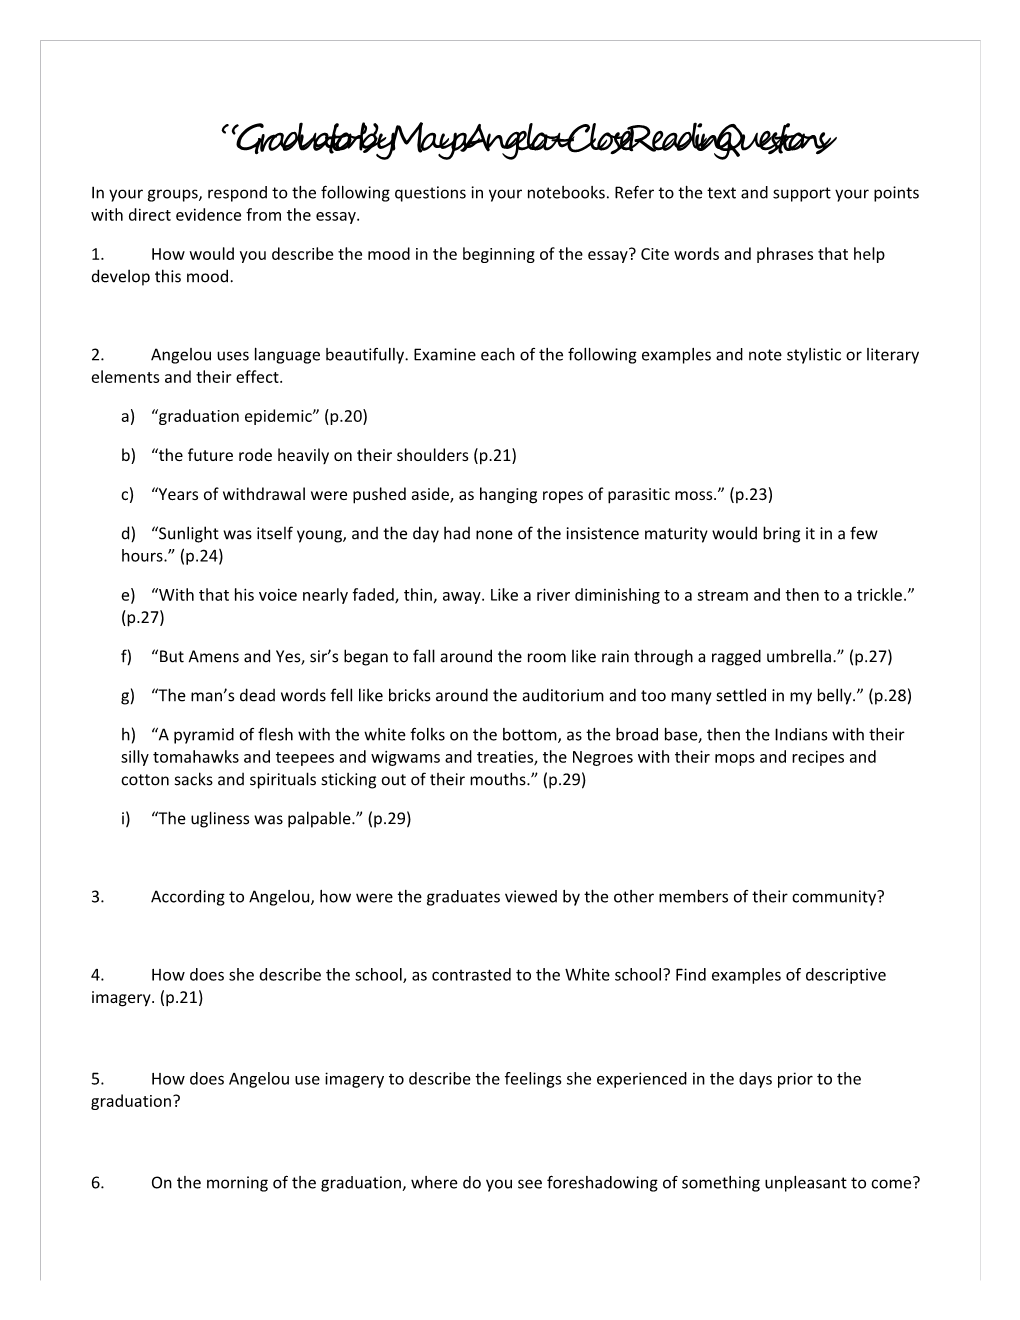 Graduation by Maya Angelou Close Reading Questions